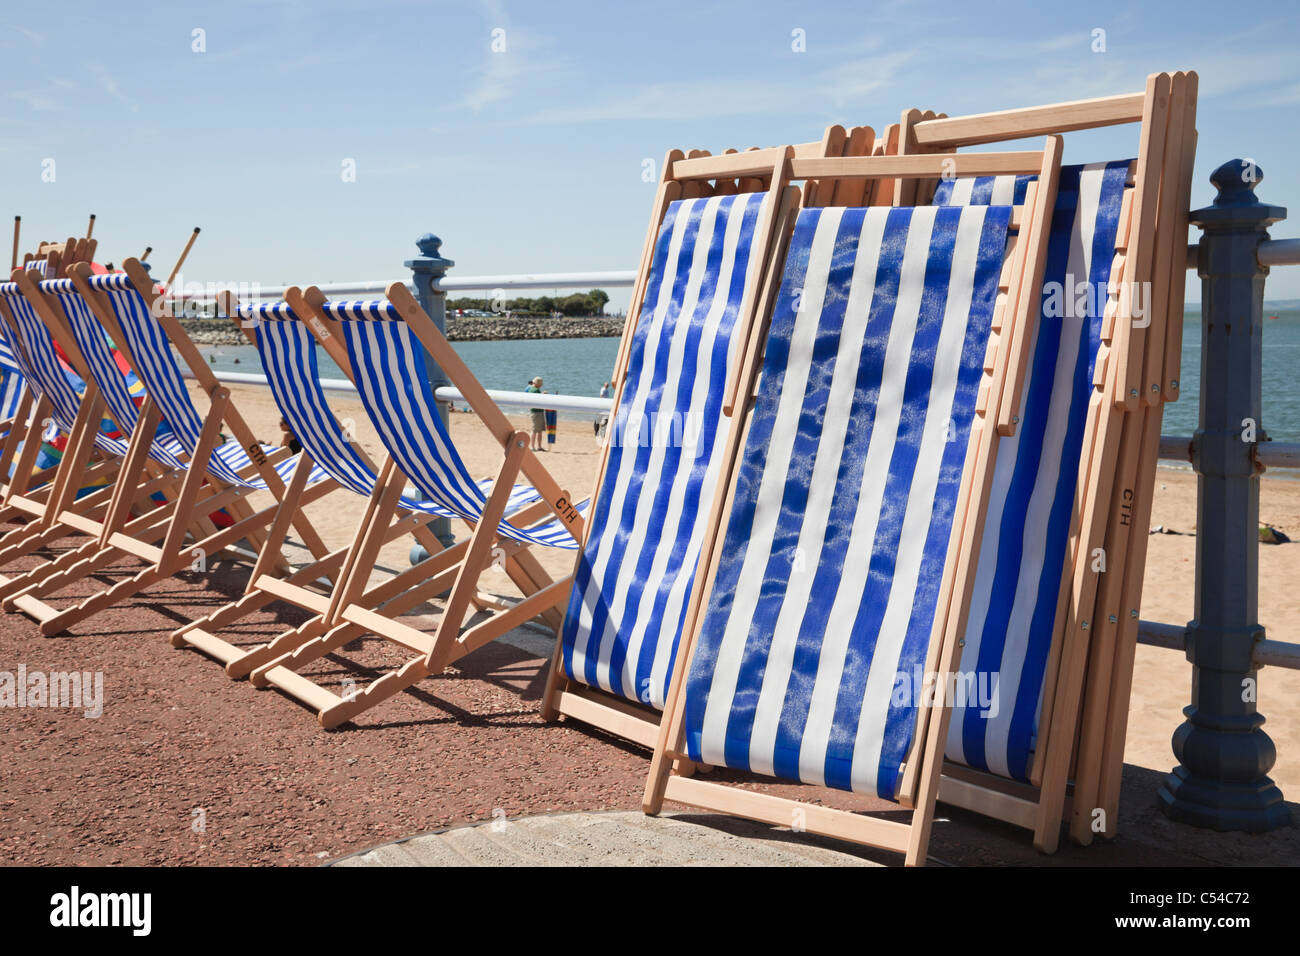 Blue and white striped deckchairs for hire on a seafront promenade at the seaside beach in mid summer. Morecambe, Lancashire, England, UK. Stock Photo